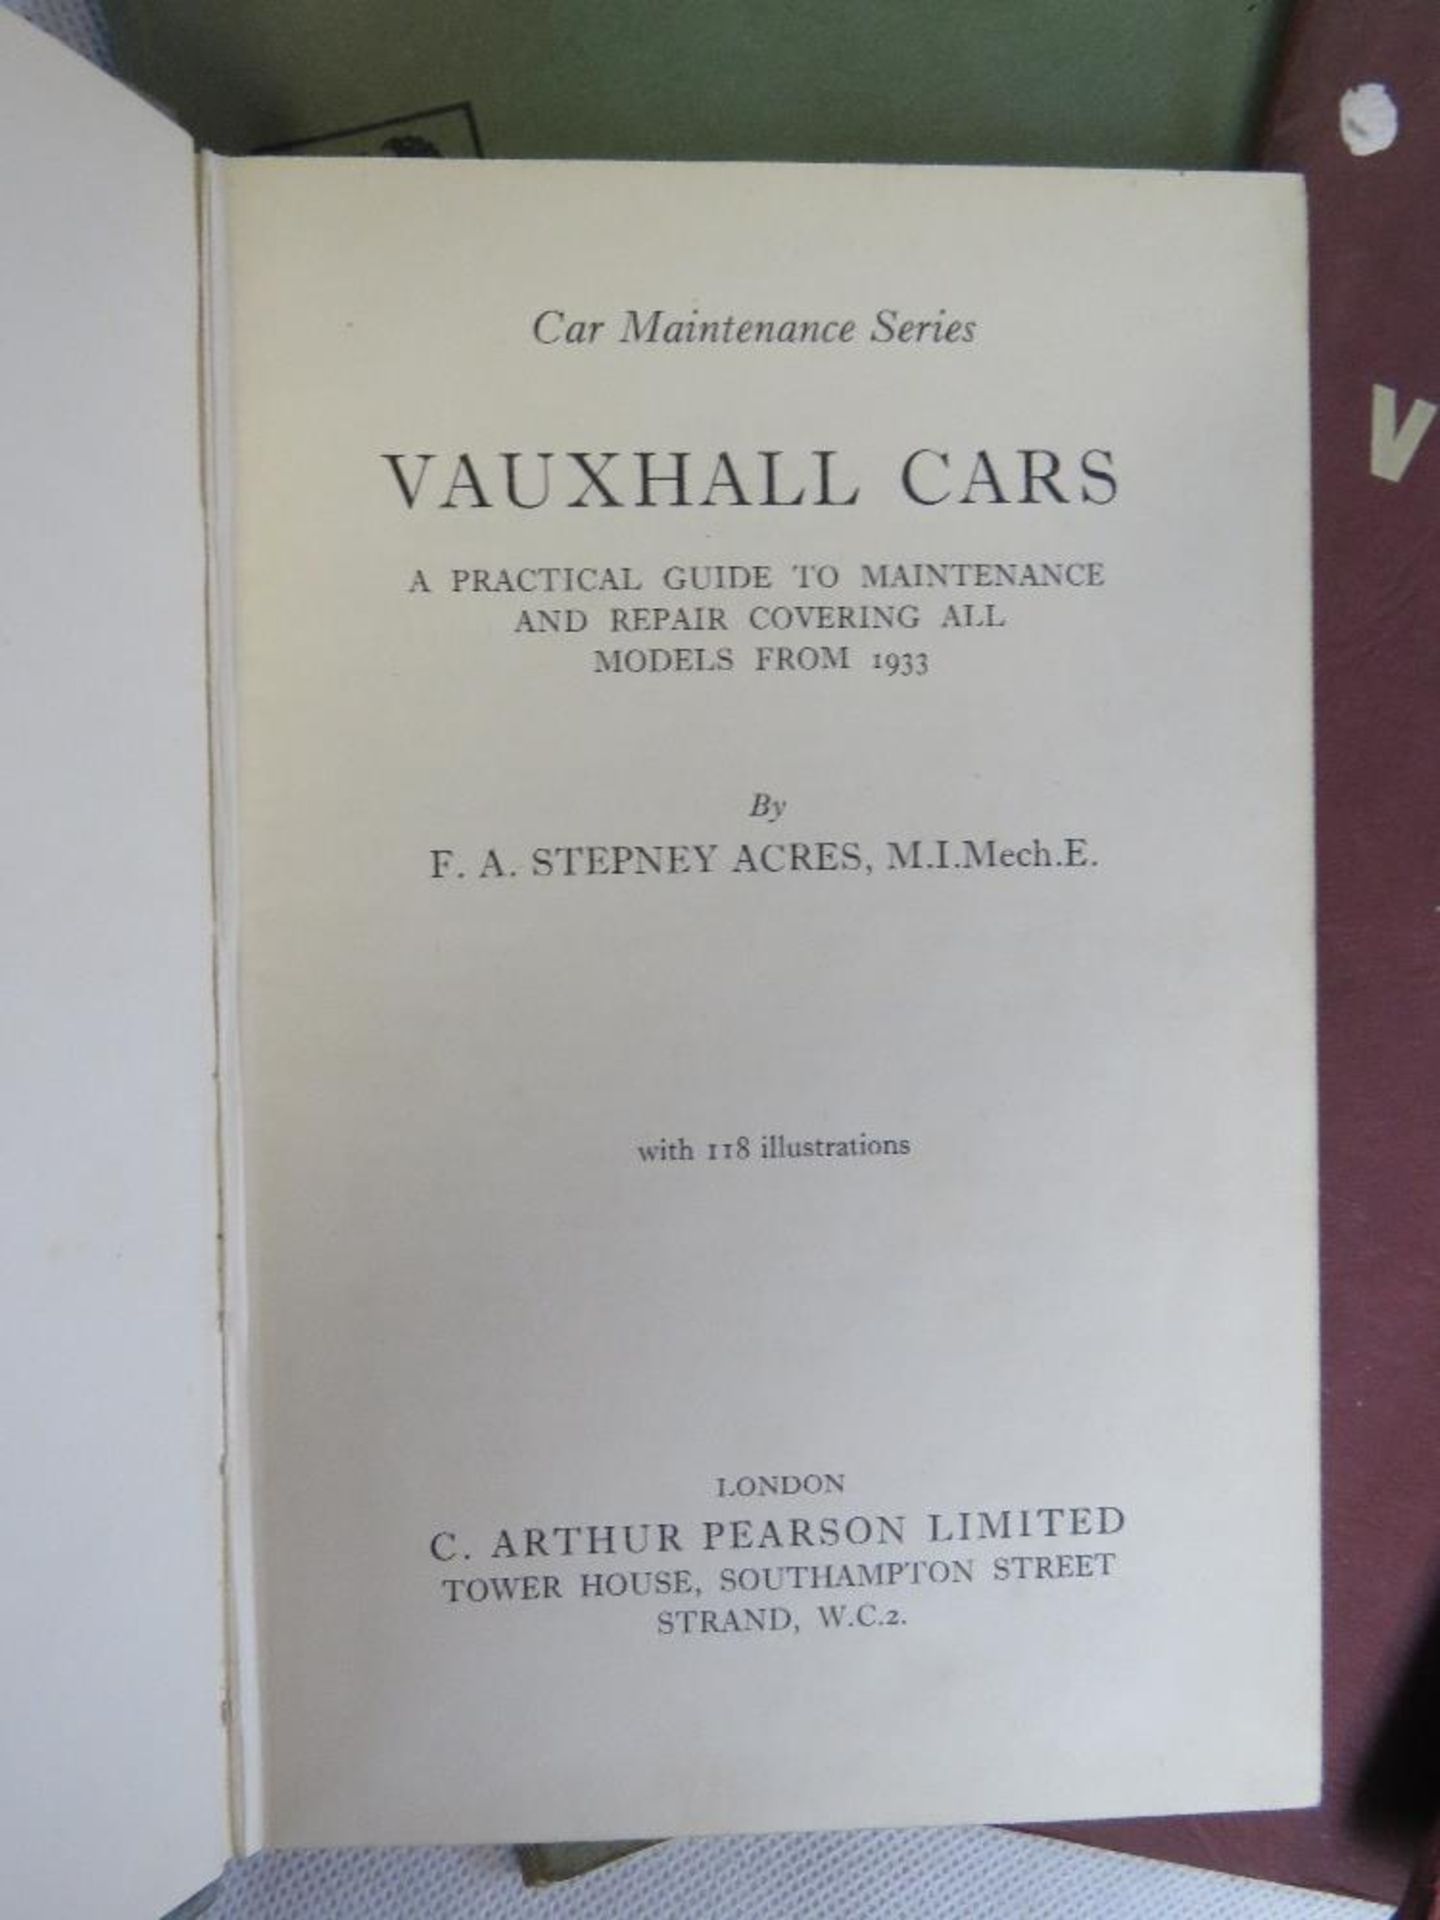 A quantity of Vauxhall handbooks and Pearson's car servicing books. - Image 2 of 5